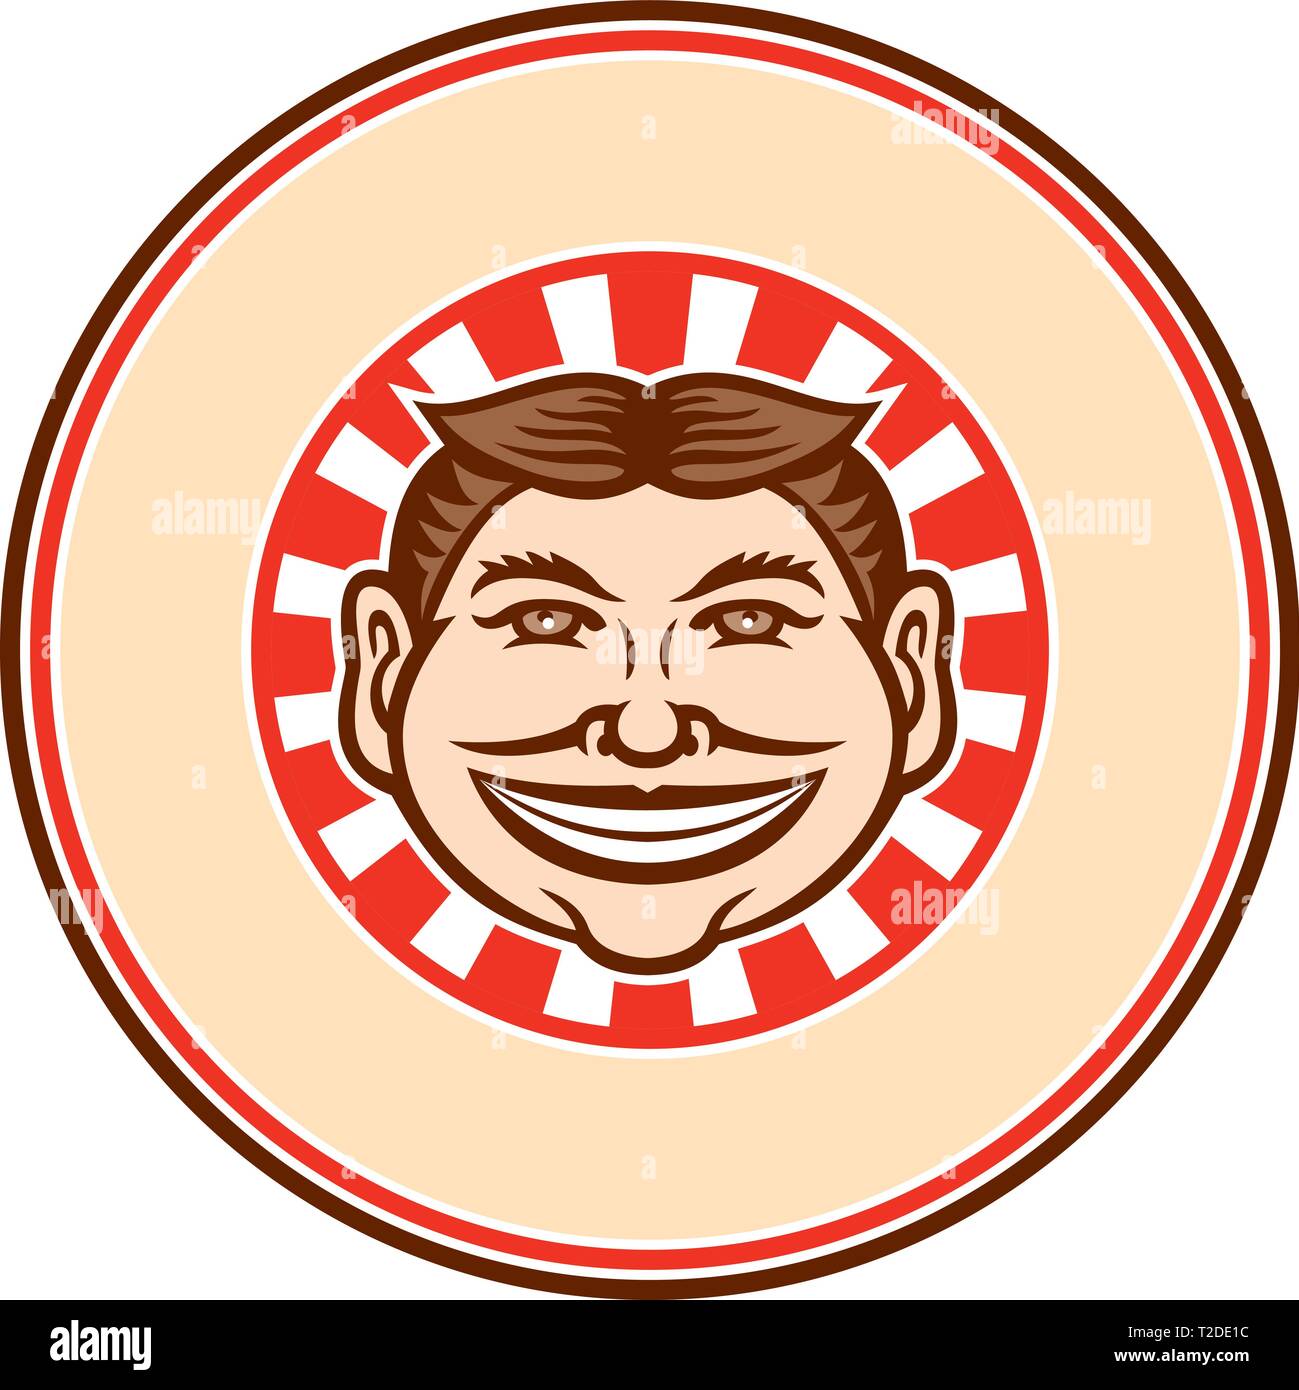 Mascot icon illustration of head of a grinning, leering, smiling funny face slyly beaming mug with hair parted in middle viewed from front with sunbur Stock Vector